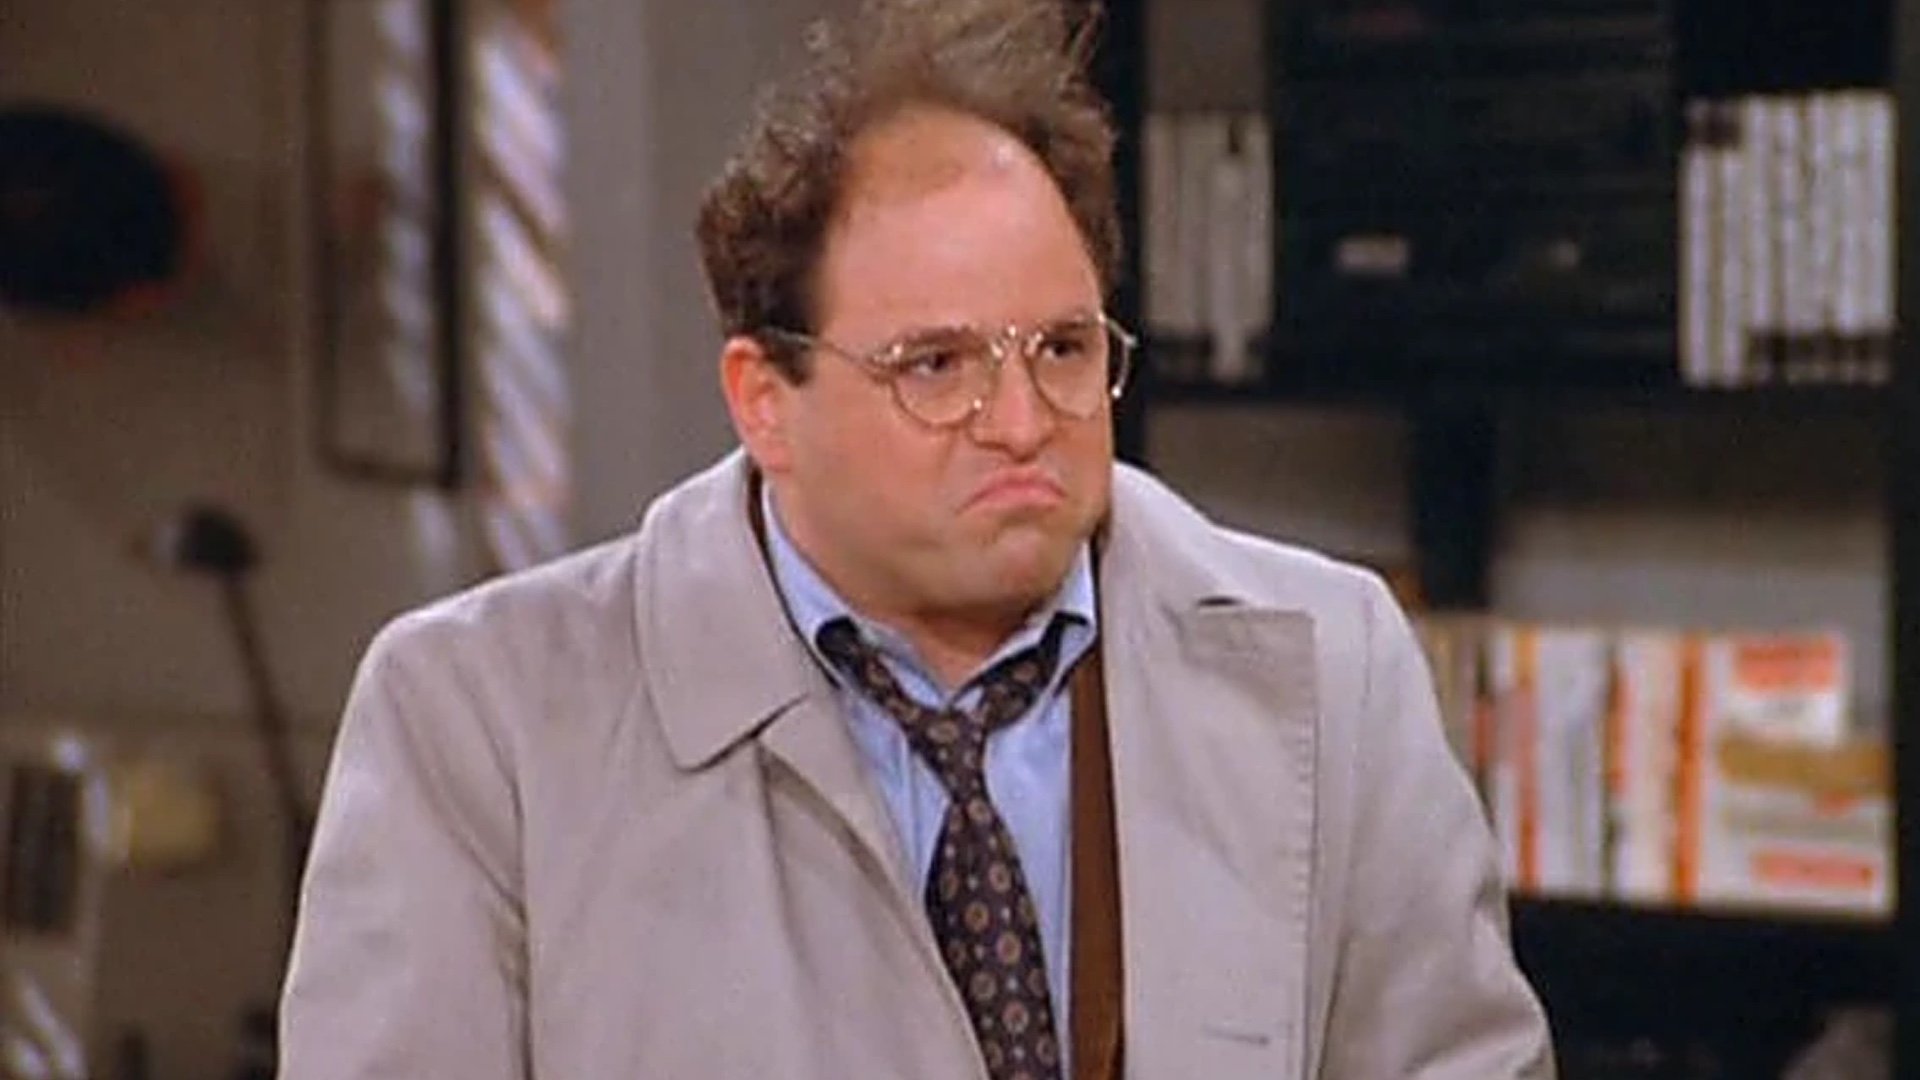 SEINFELD Star Jason Alexander Talks About Auditioning For The Role of George Costanza